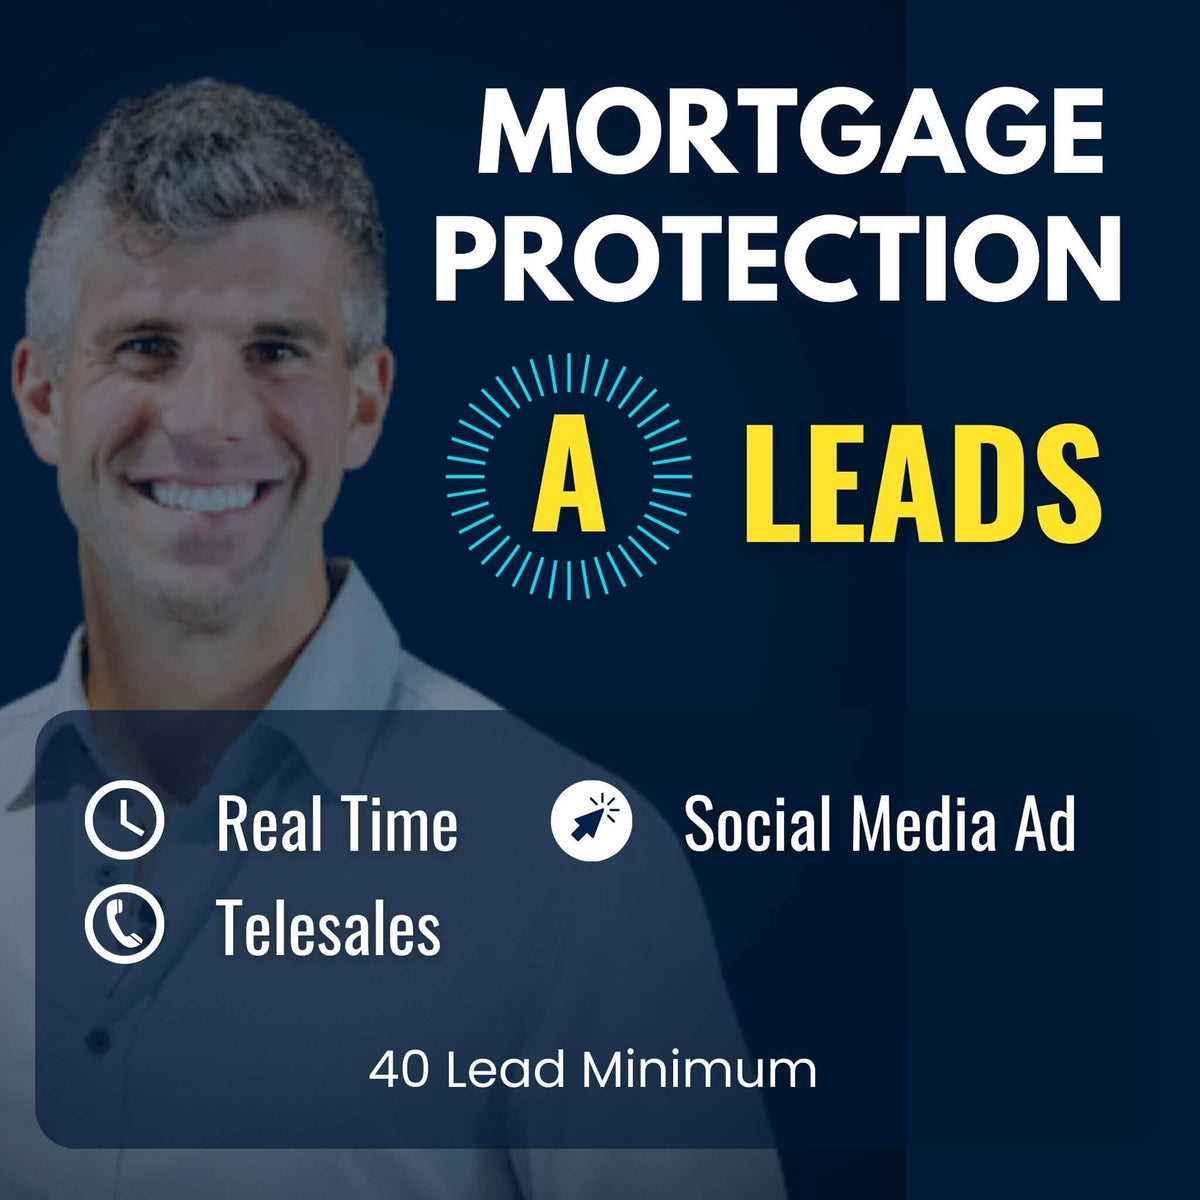 Mortgage Protection - 40 'A' Leads